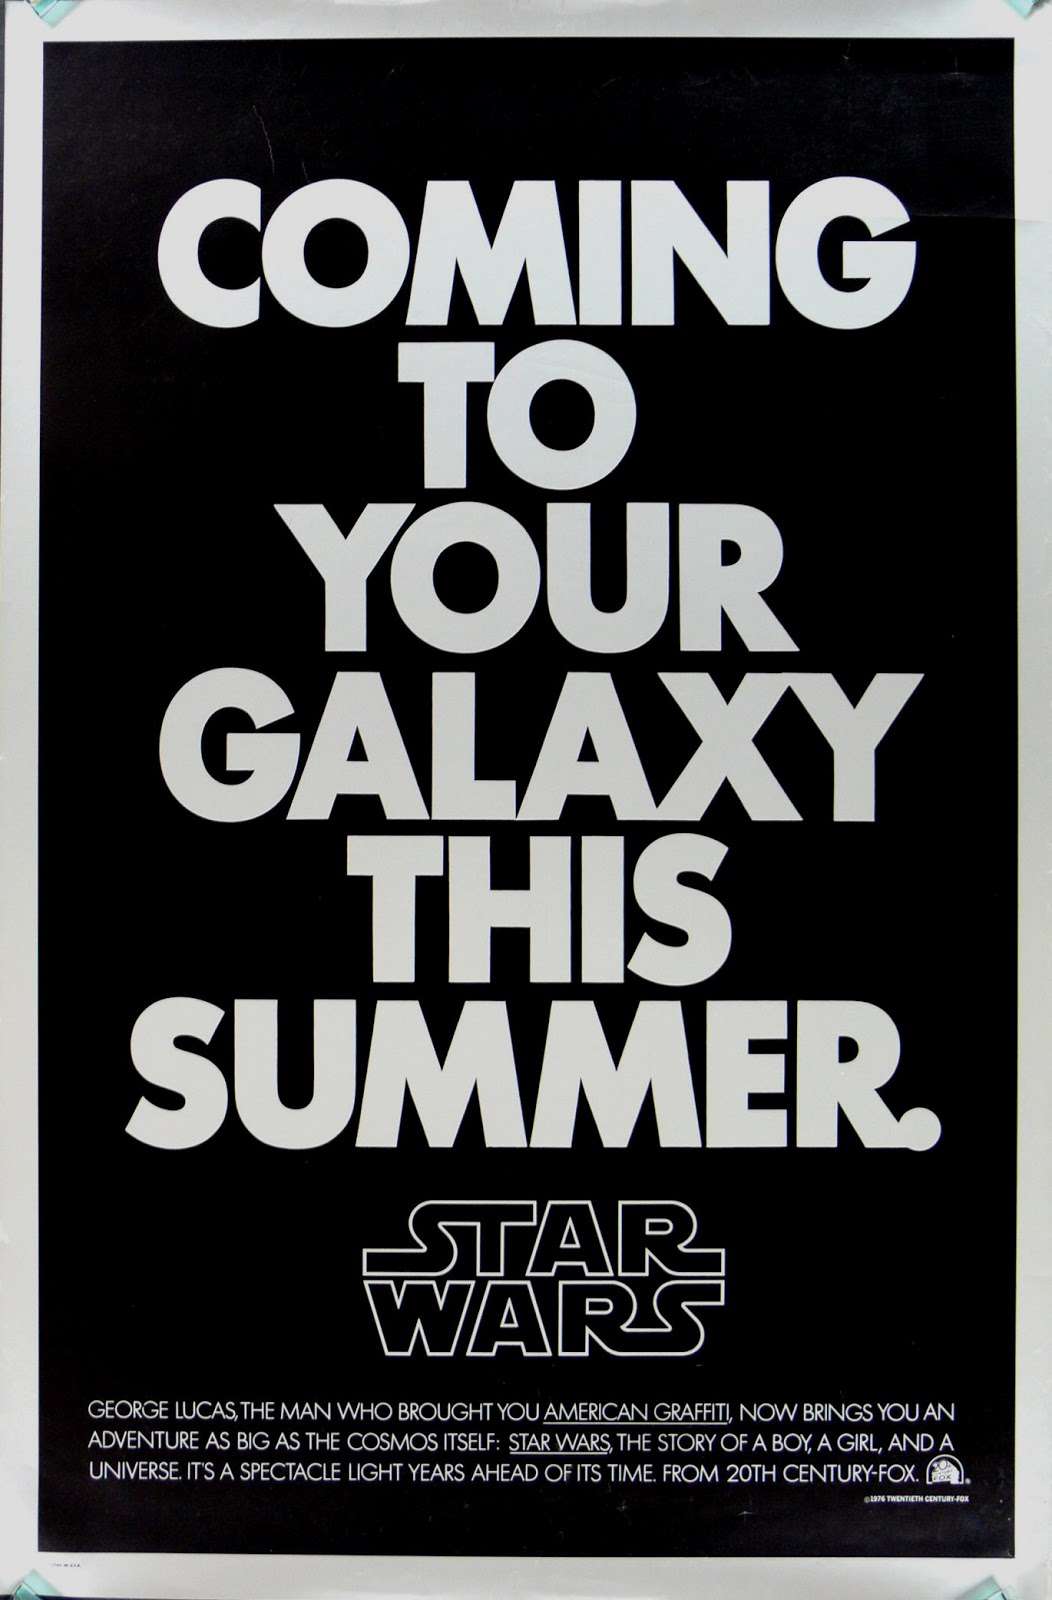 1970s Star Wars poster.